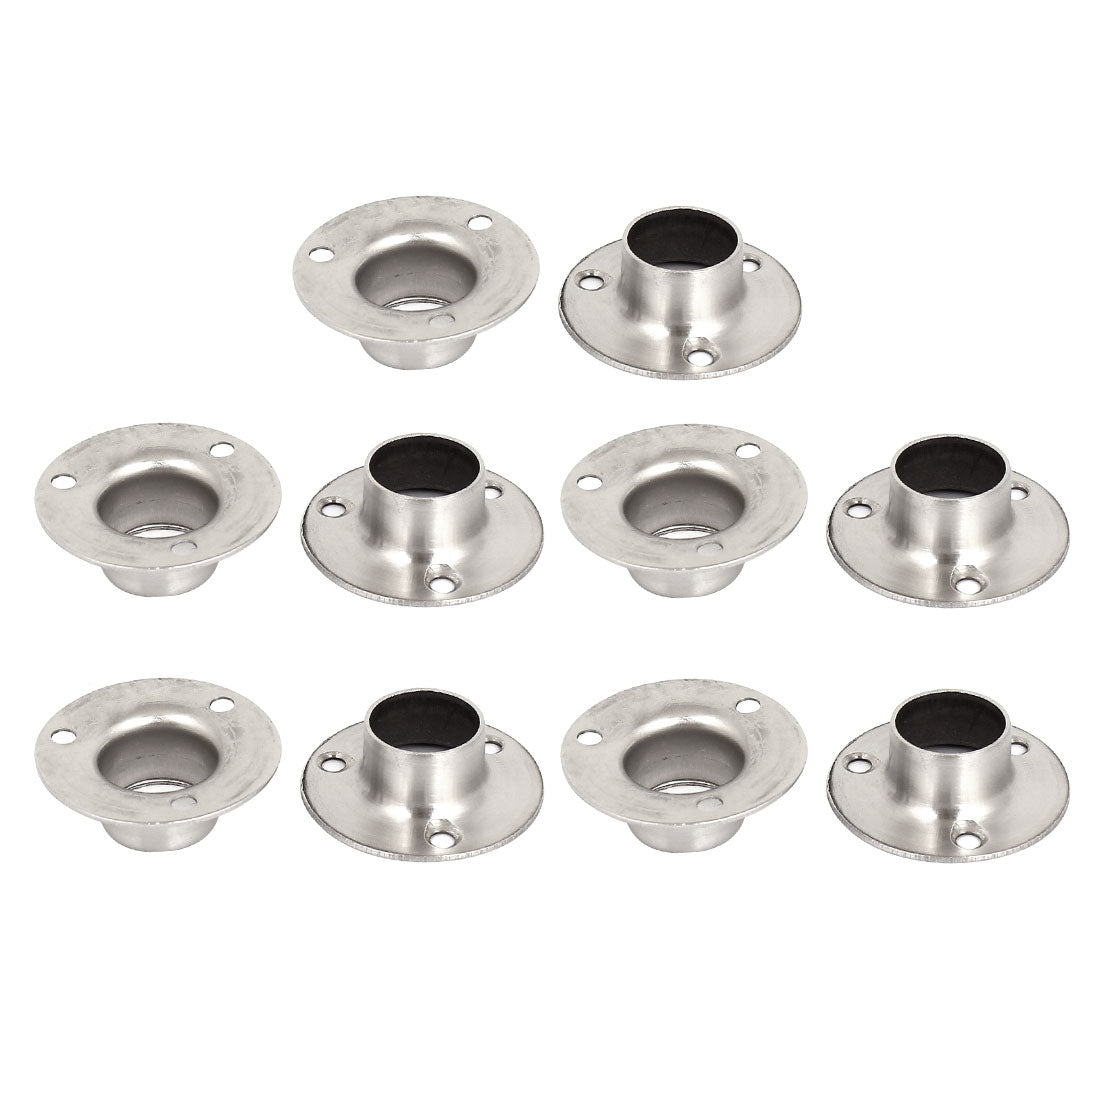 uxcell Uxcell 10pcs Wardrobe Hanging Rail Rod End Support Bracket Socket for 19mm Dia Tube